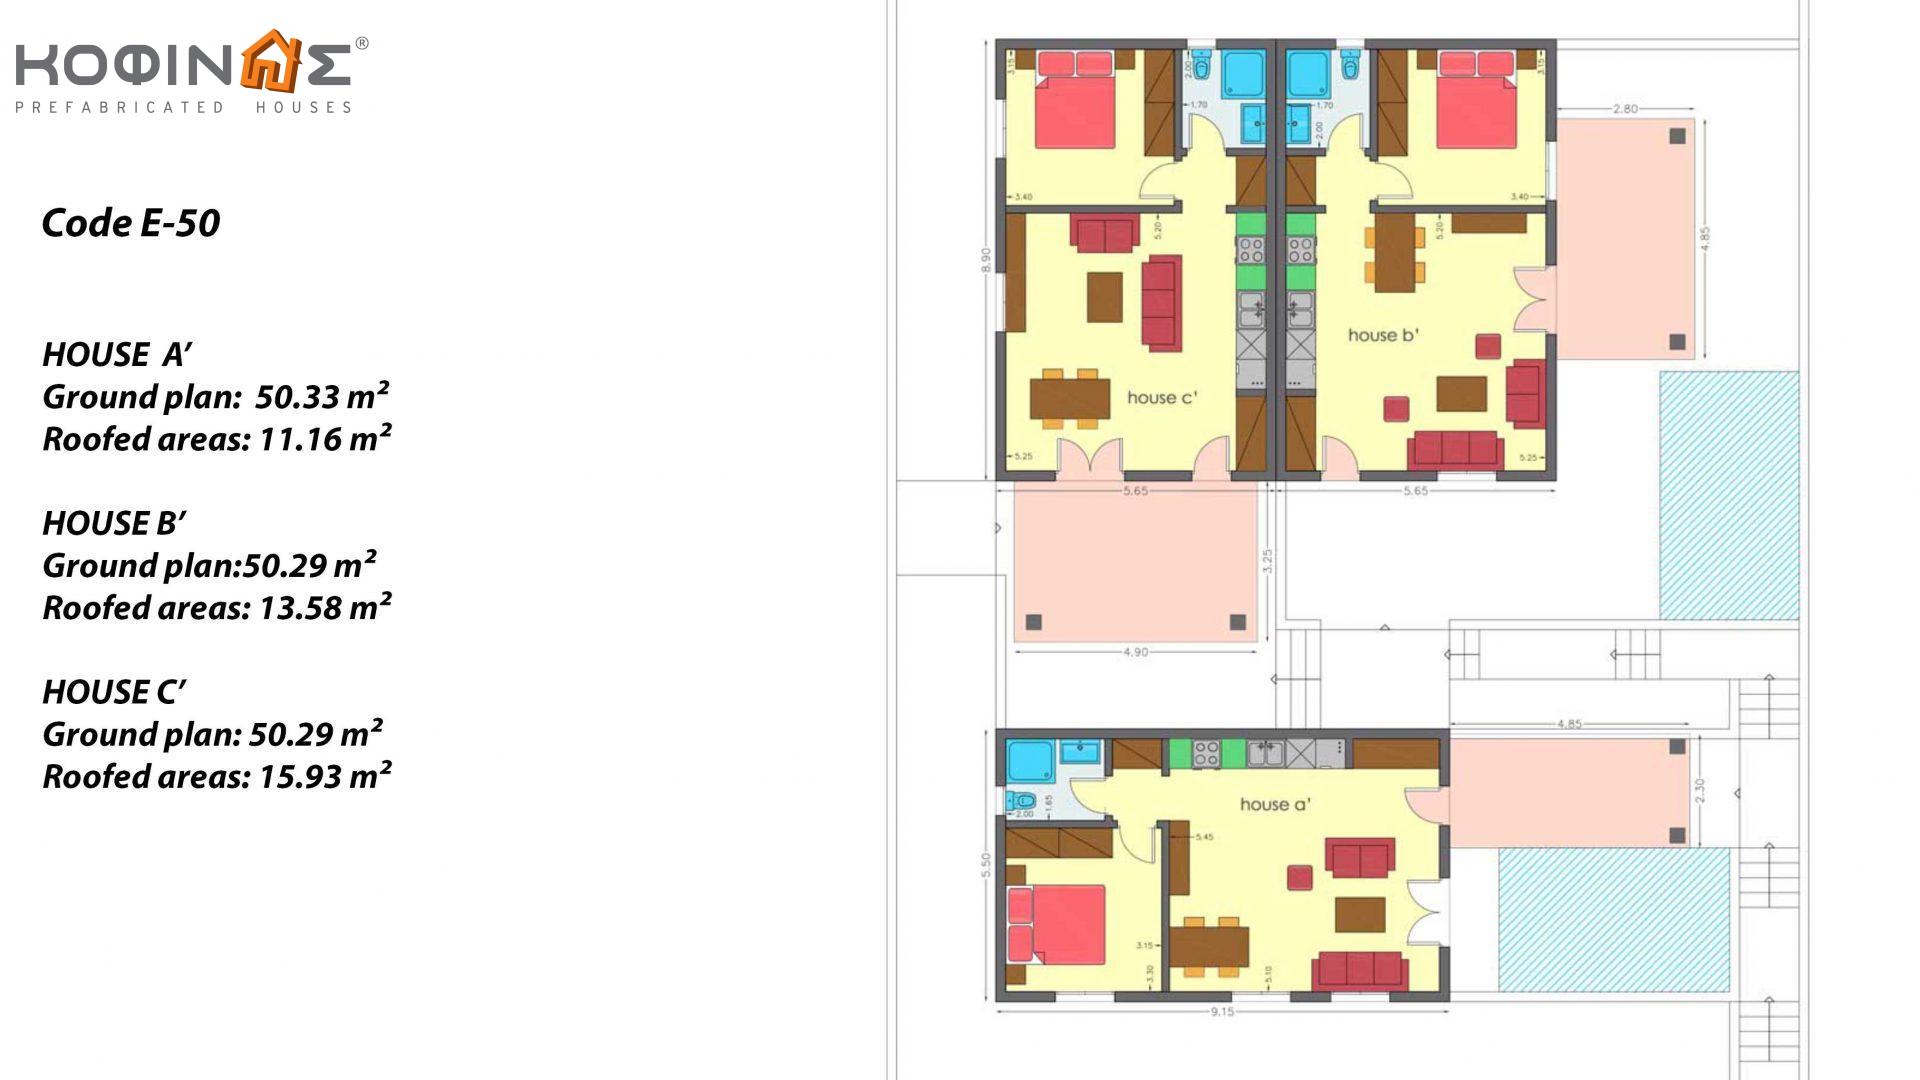 1 Storey Complex E-50, total surface of 3 x 50,30 = 150,90 m², covered areas 40.67 m²